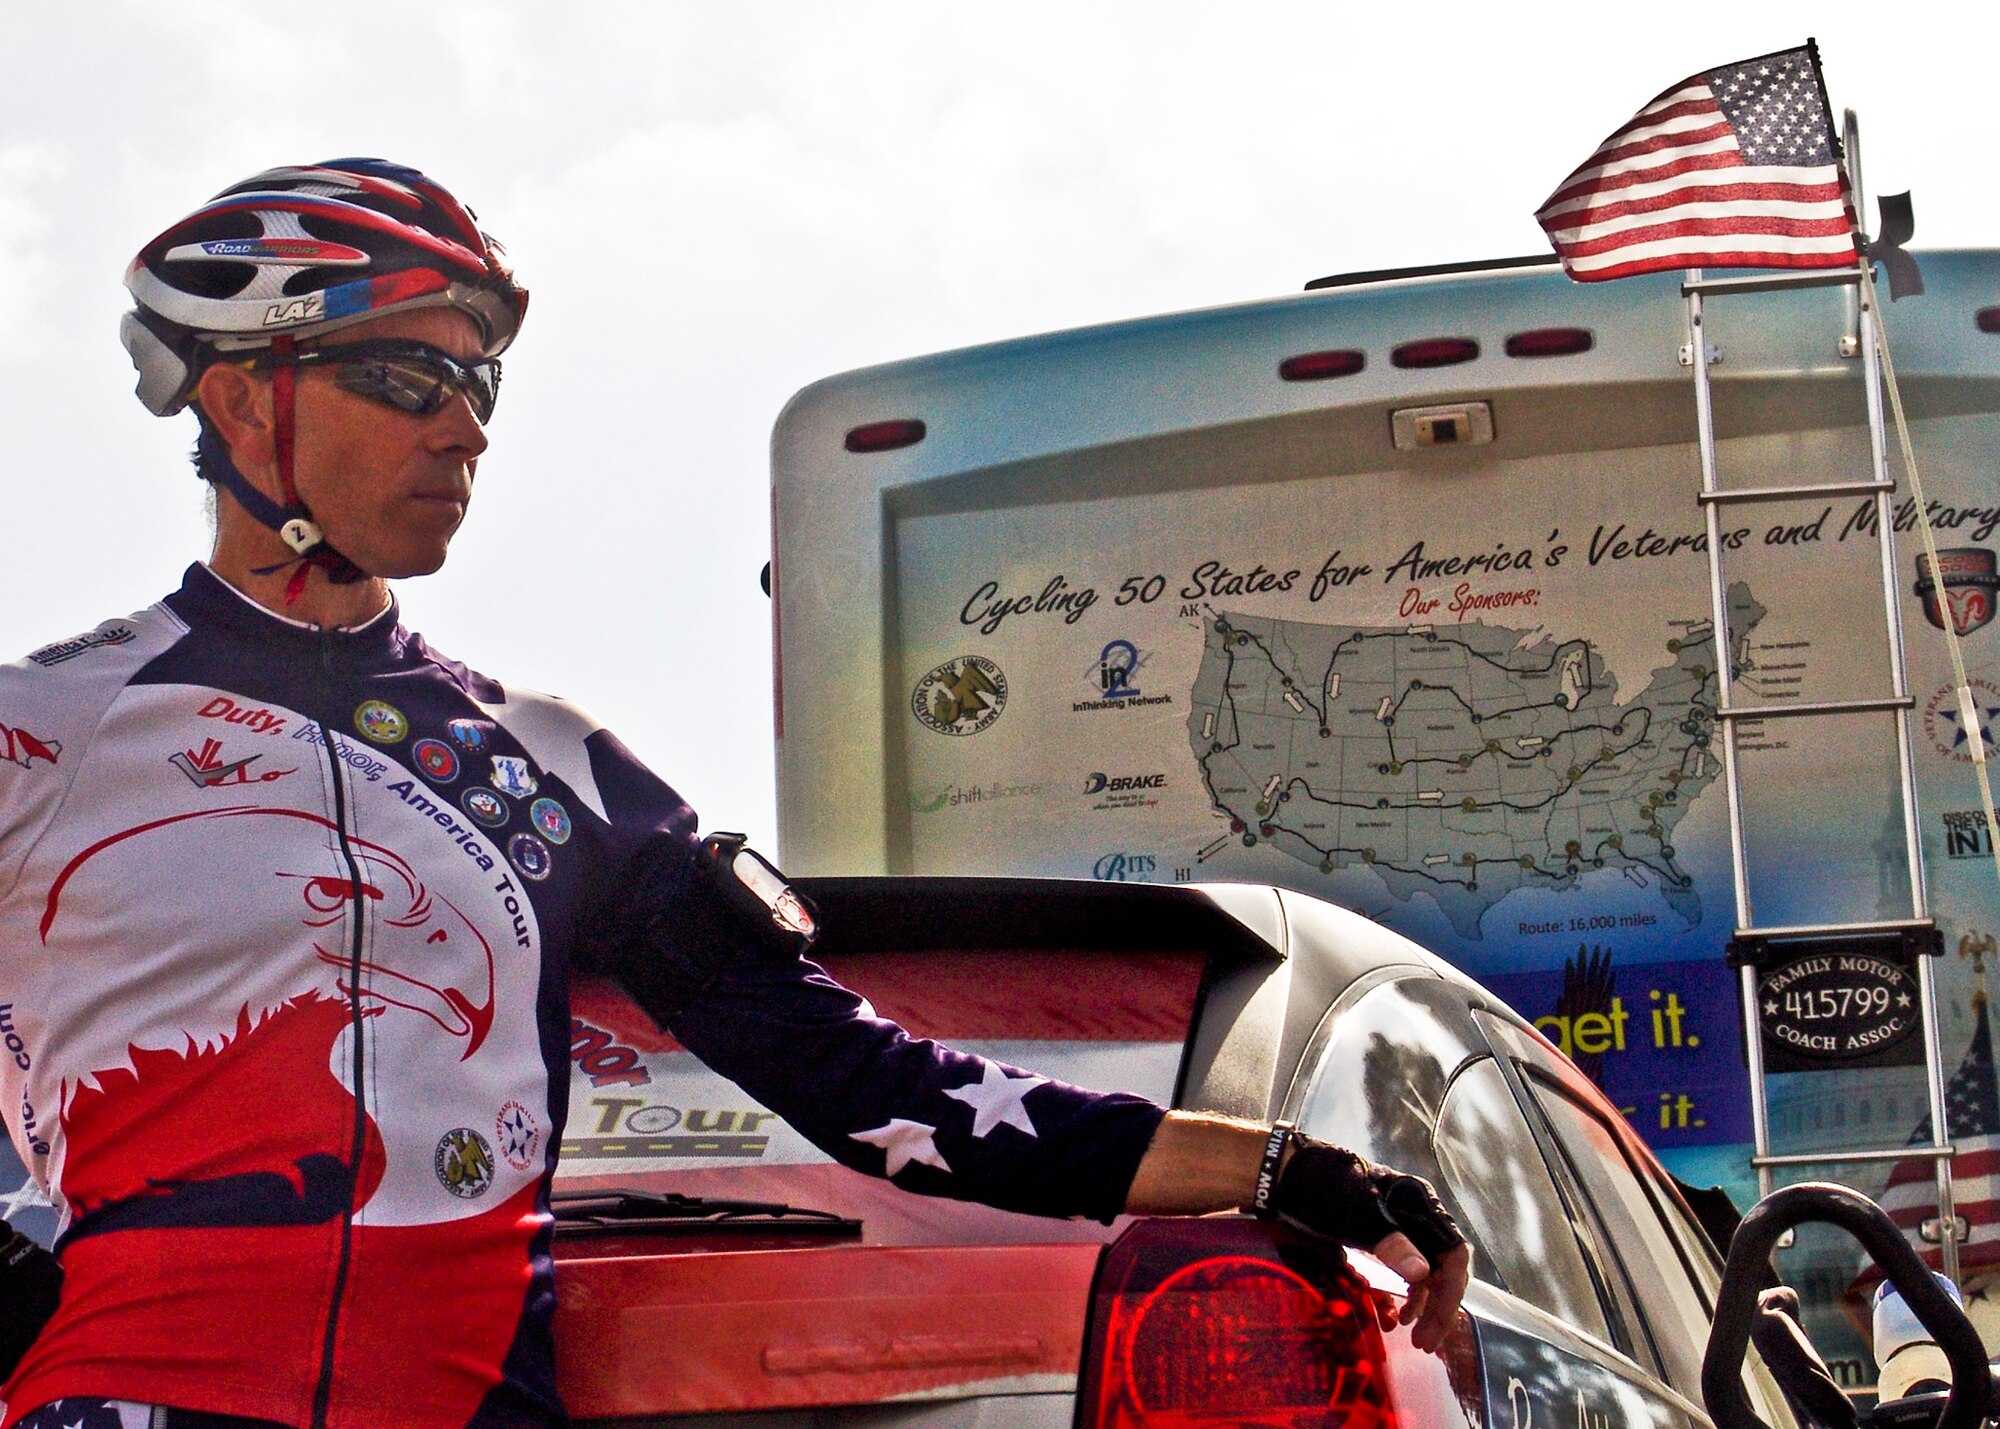 Doug Adams, cyclist for Duty Honor America tour, prepares to cycle to his next city from the Air Force Armament Museum.  Mr. Adams and his wife Deb Lewis are in the southern region of their cyclist tour across America raising awareness for veteran and military advocacy. (U.S. Air Force photo/Sachel Seabrook)

 
